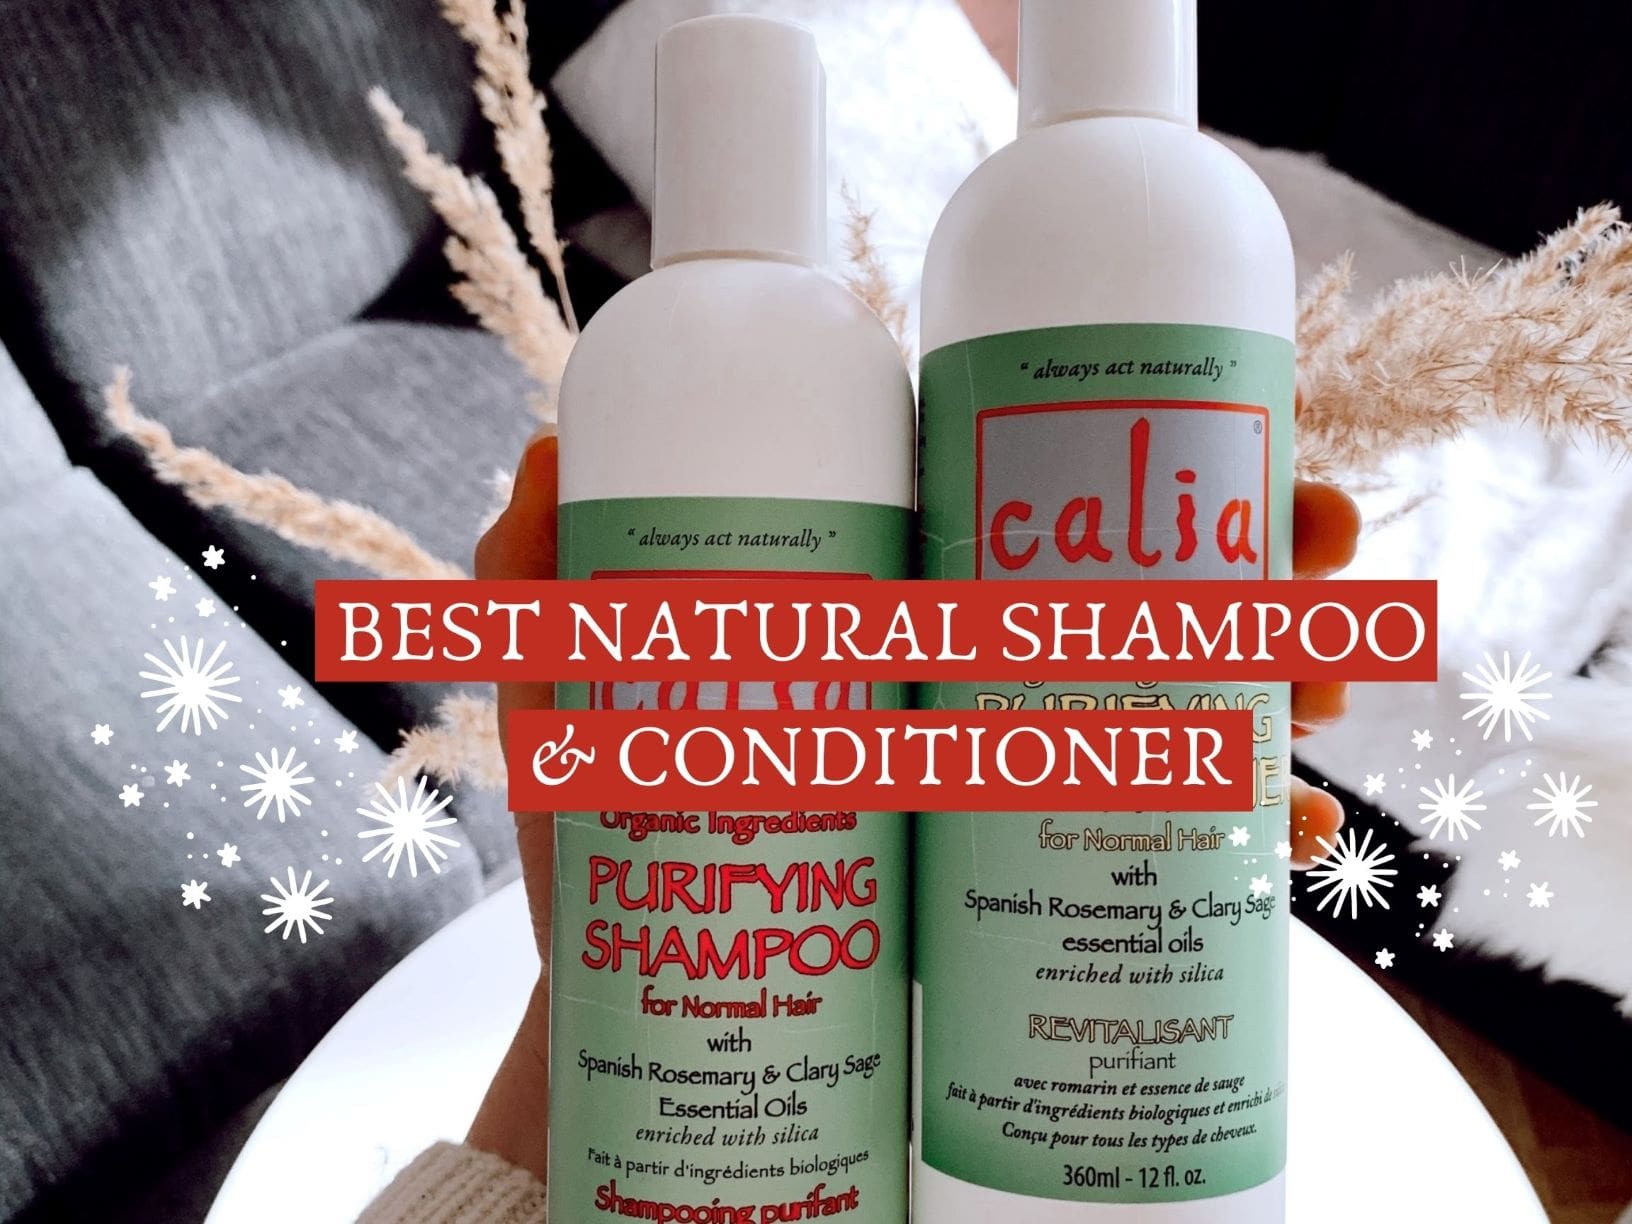 The Best Natural Shampoo and Conditioner - Earthy Vibes